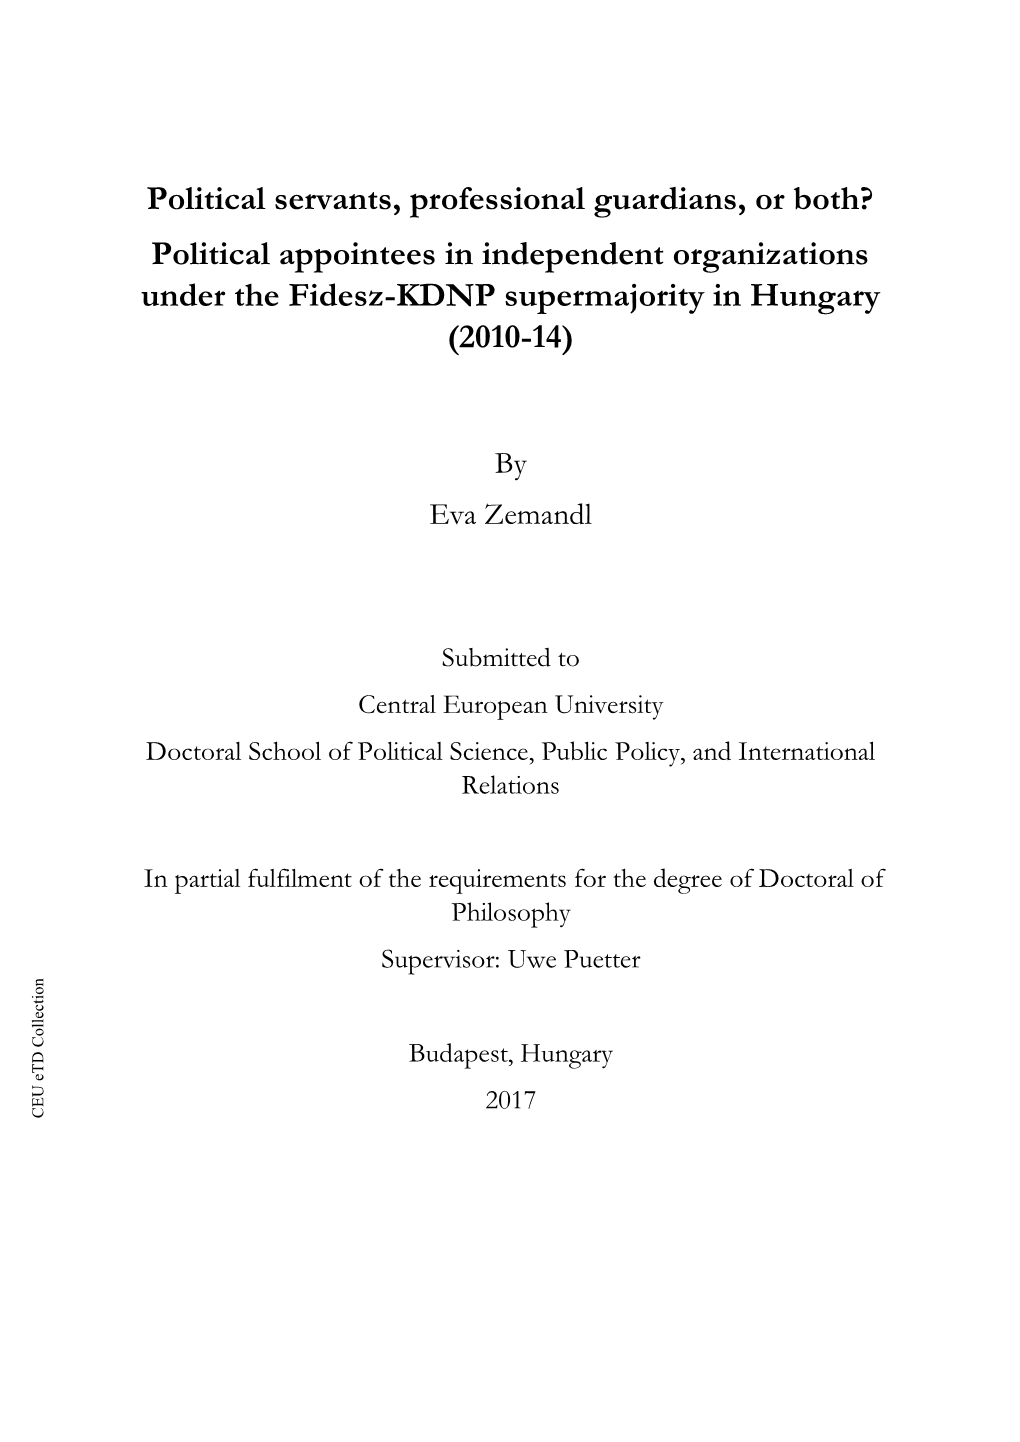 Political Servants, Professional Guardians, Or Both? Political Appointees in Independent Organizations Under the Fidesz-KDNP Supermajority in Hungary (2010-14)